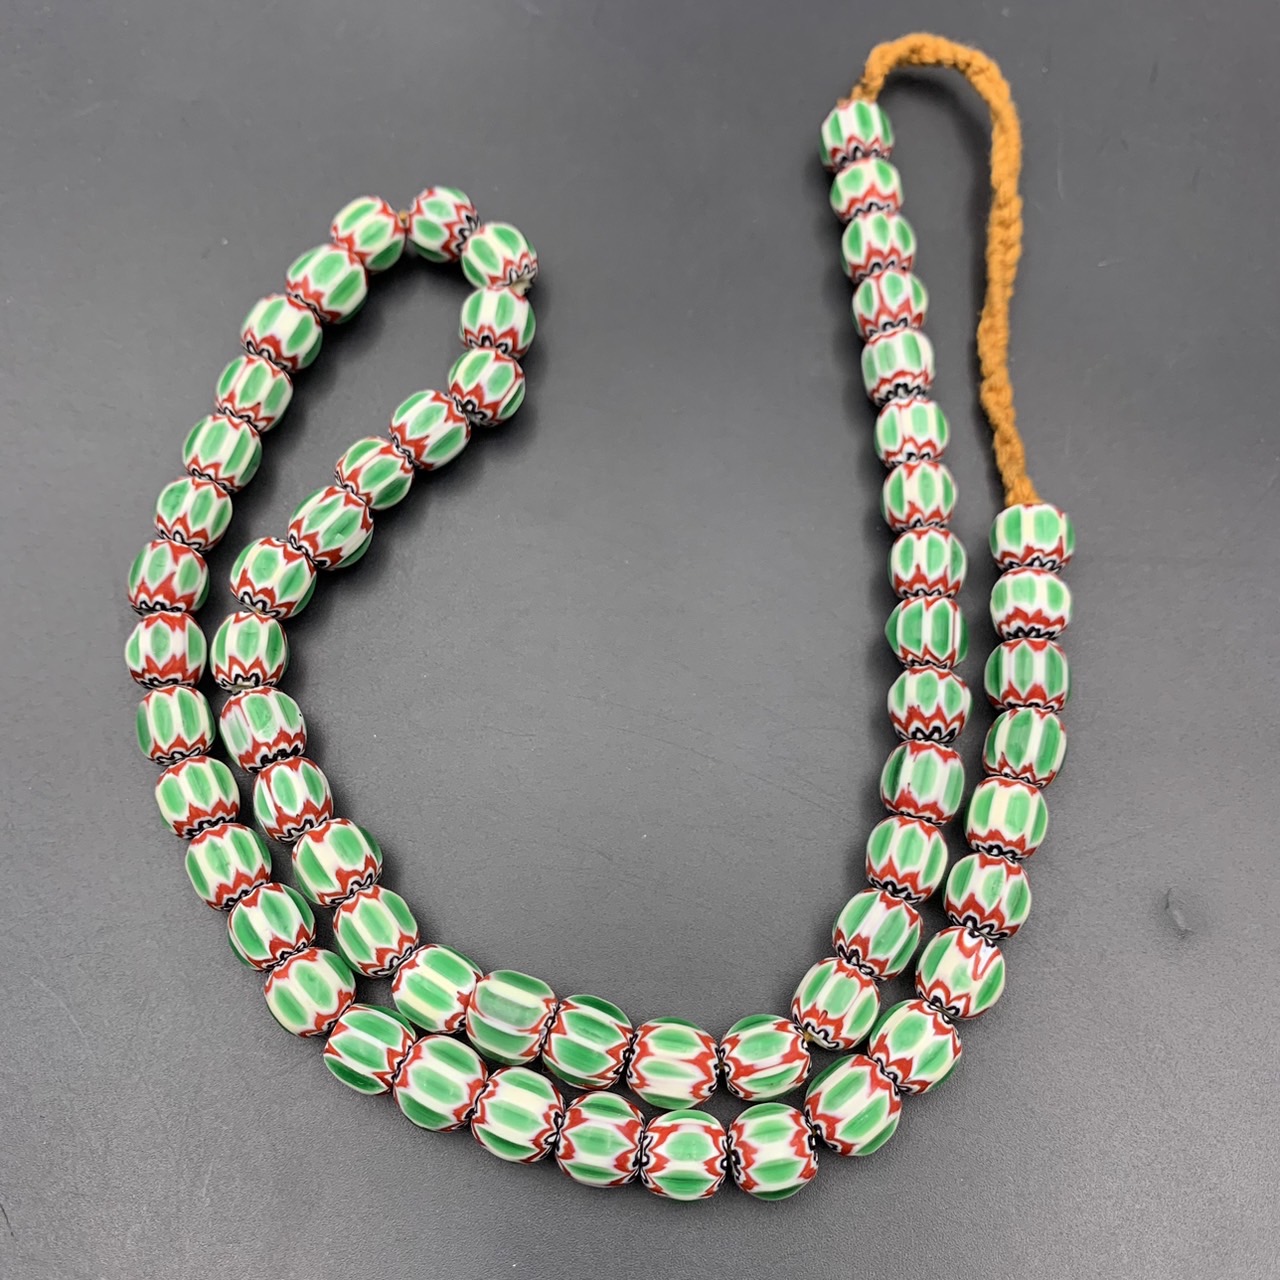 Wonderful Green Vintage Chevron Trade African Glass Beads Strand, LPBR-0322 - Image 6 of 8